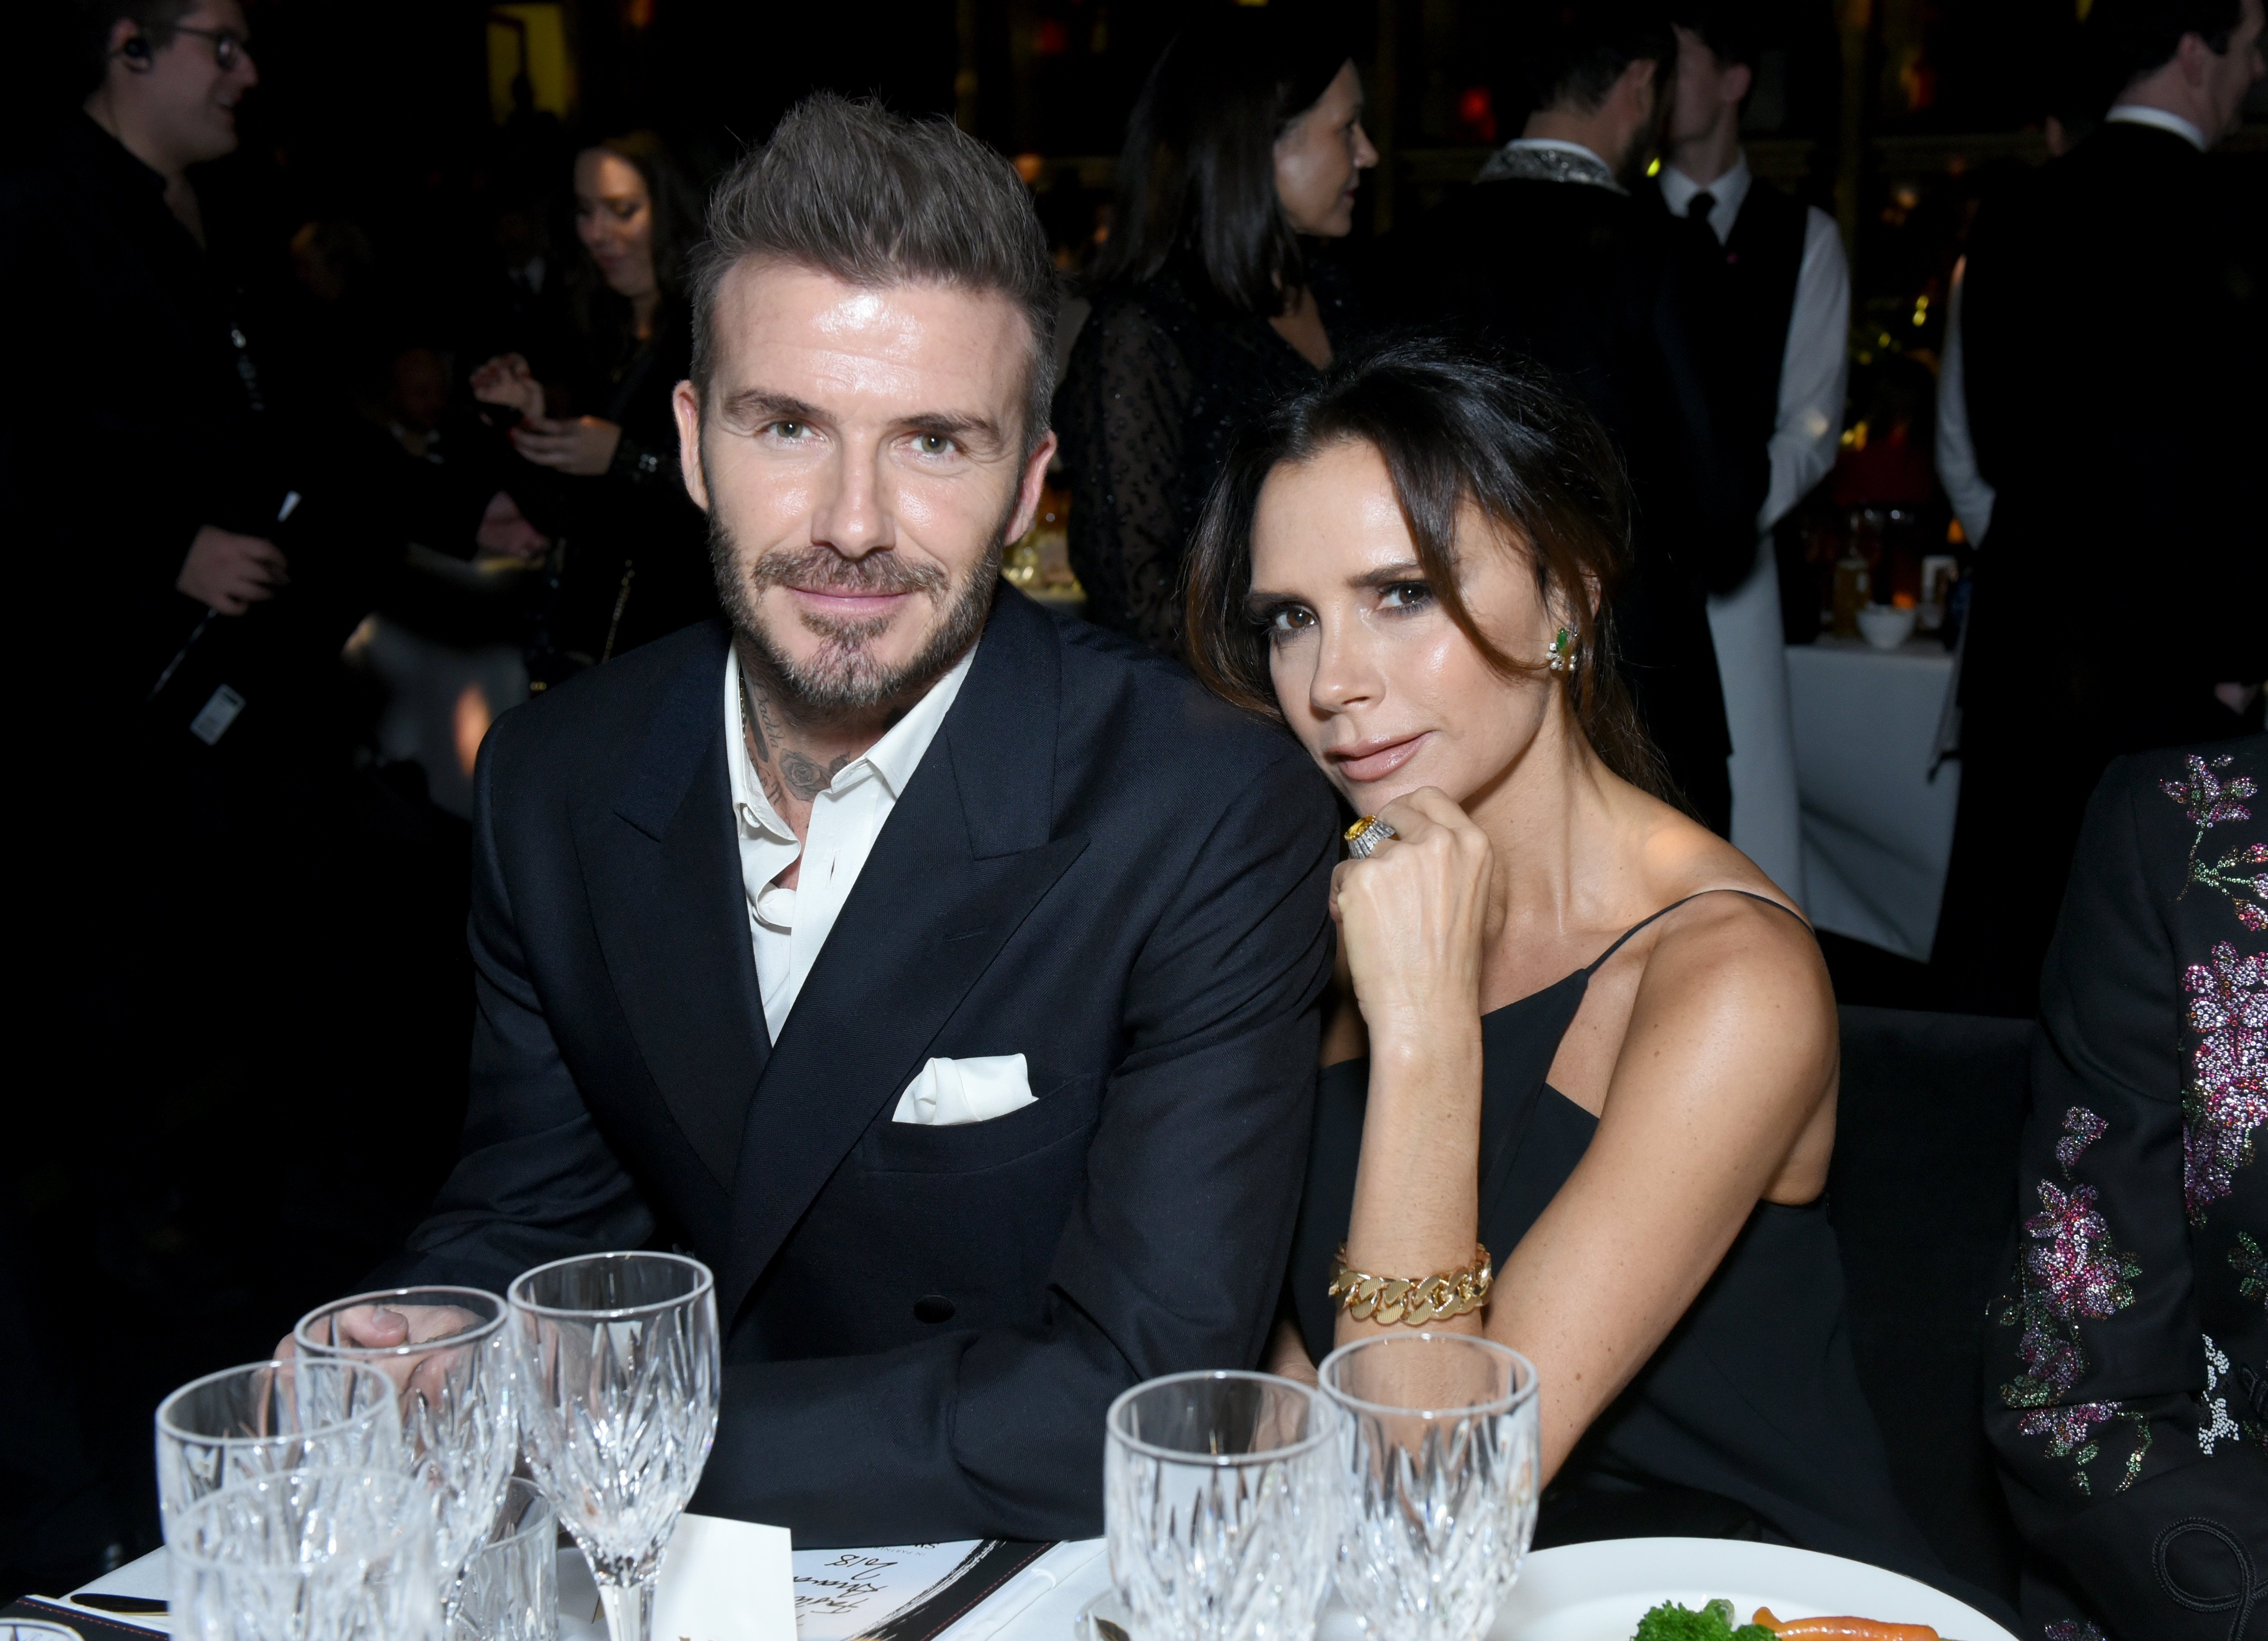 David Beckham and Victoria Beckham attend The Fashion Awards on December 10, 2018, in London, England. | Source: Getty Images